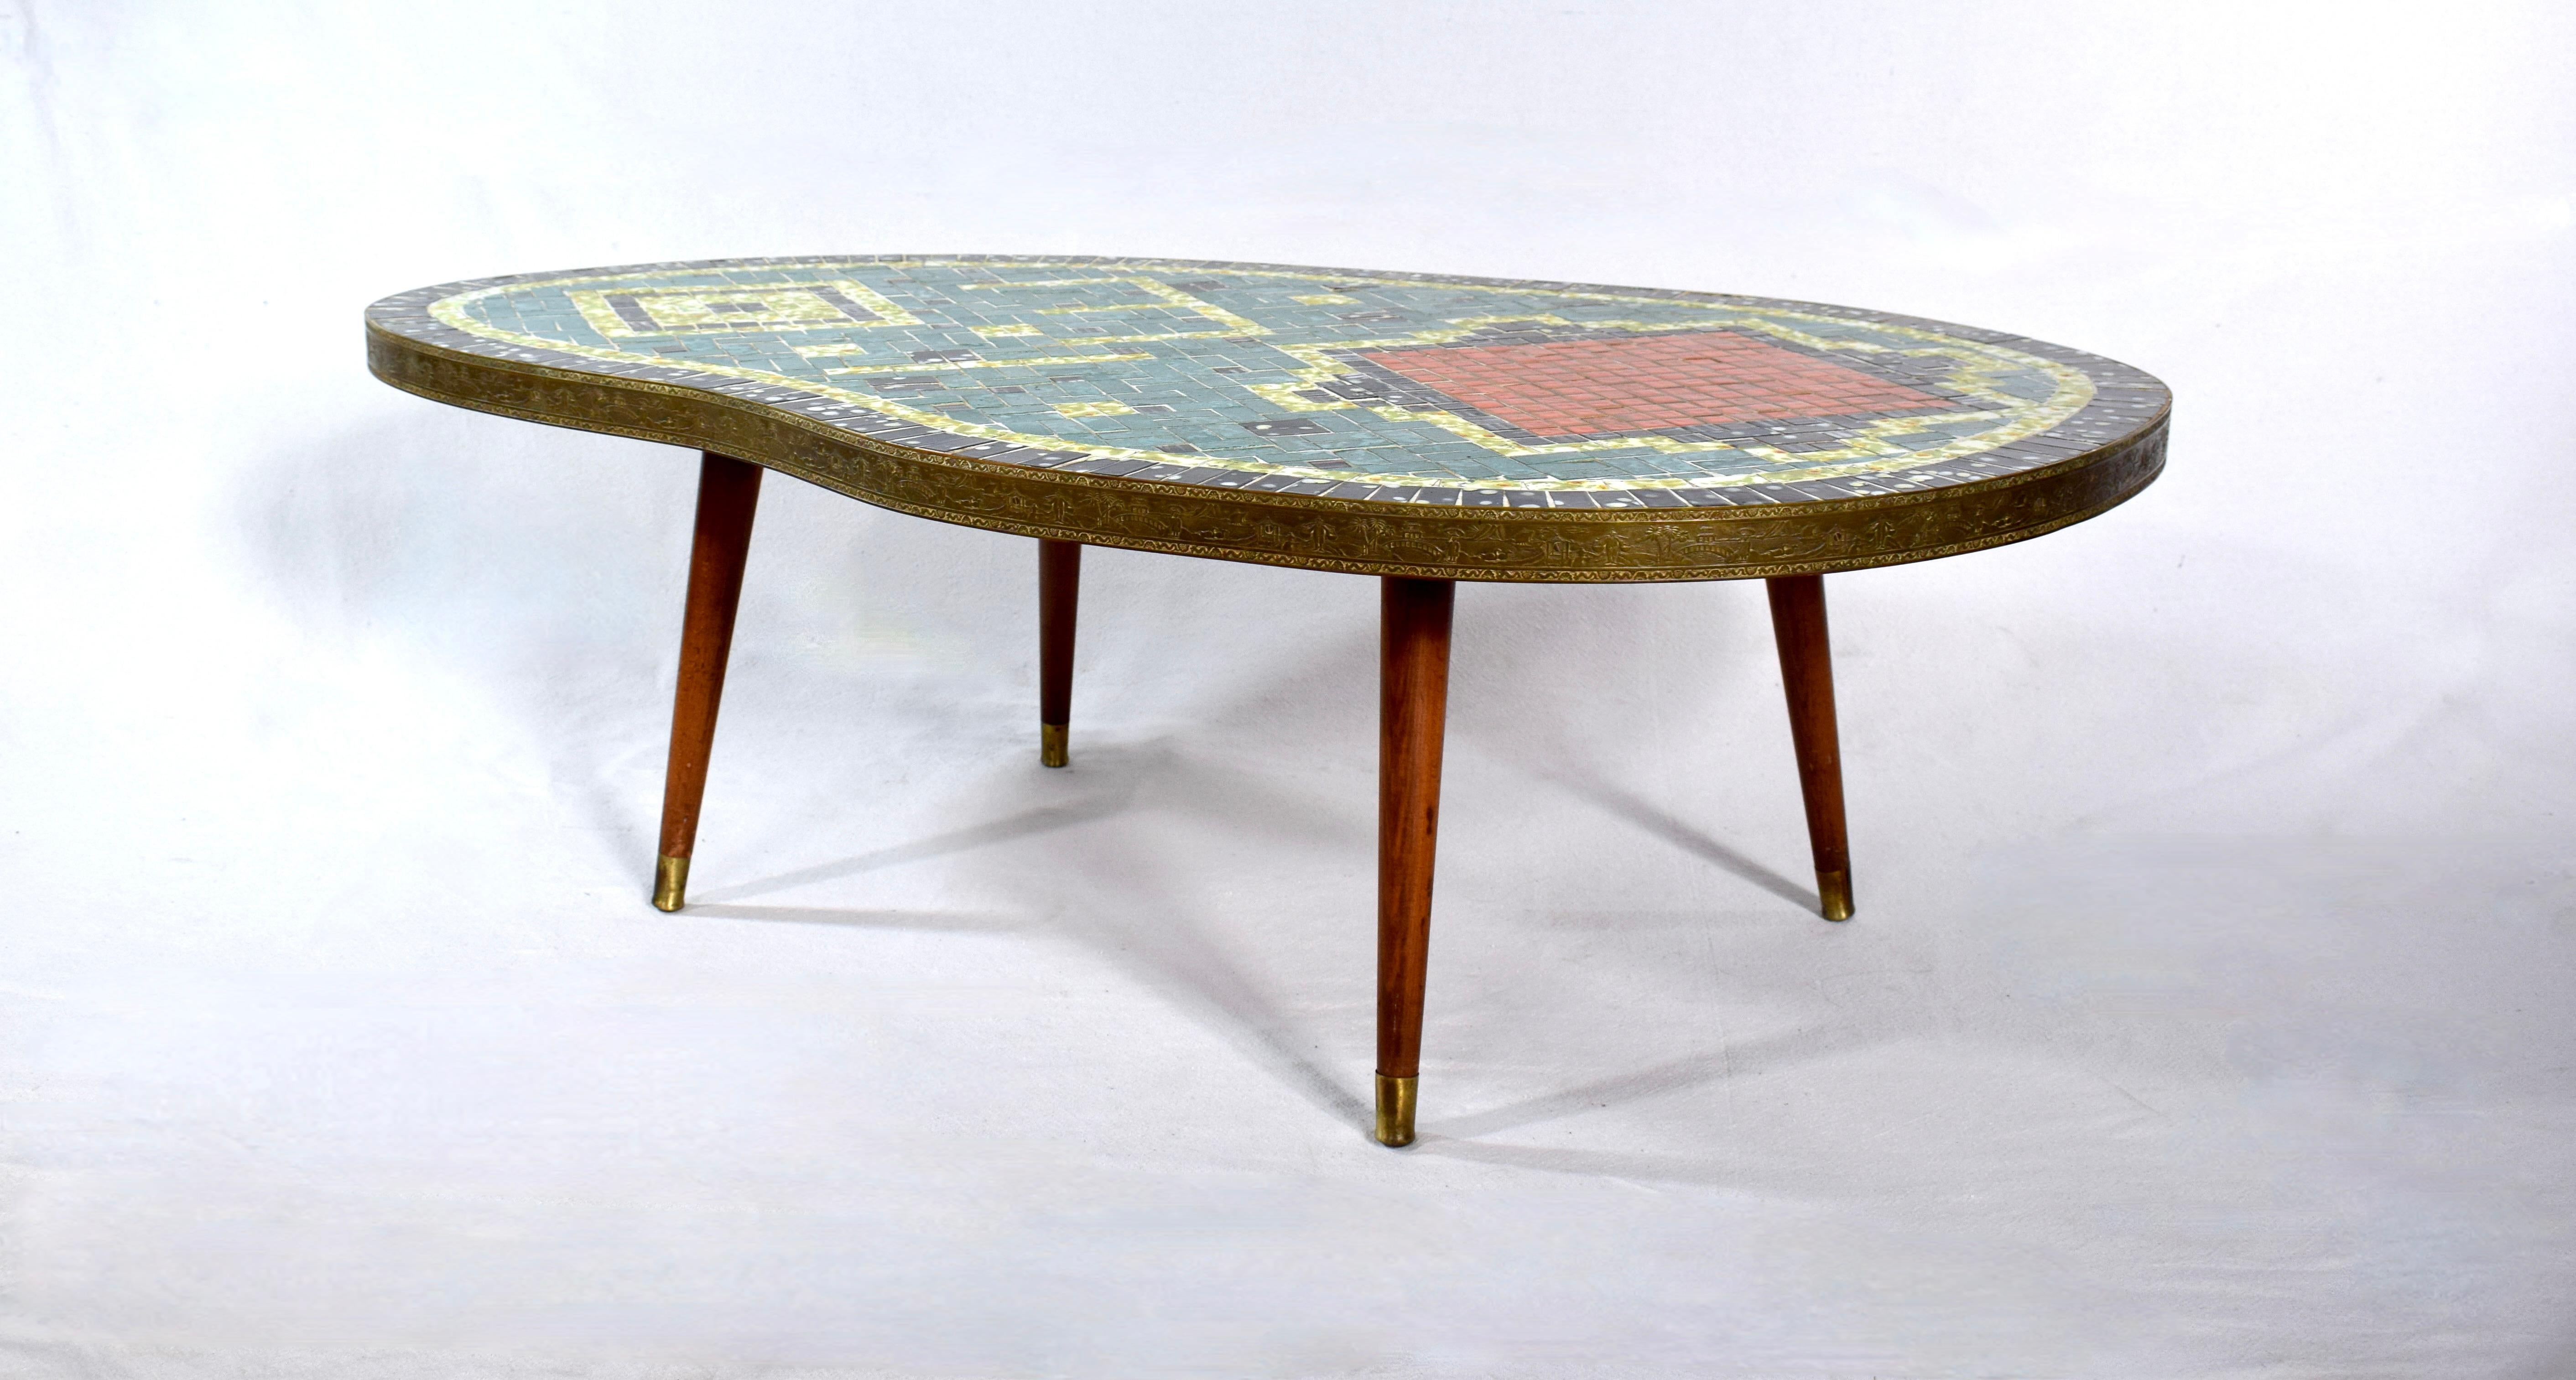 Mid century biomorphic mosaic tile table.  Biomorphic kidney shape with abstract green, orange, black & yellow tiles & brass surround. Tapered splayed brass capped legs are removable.